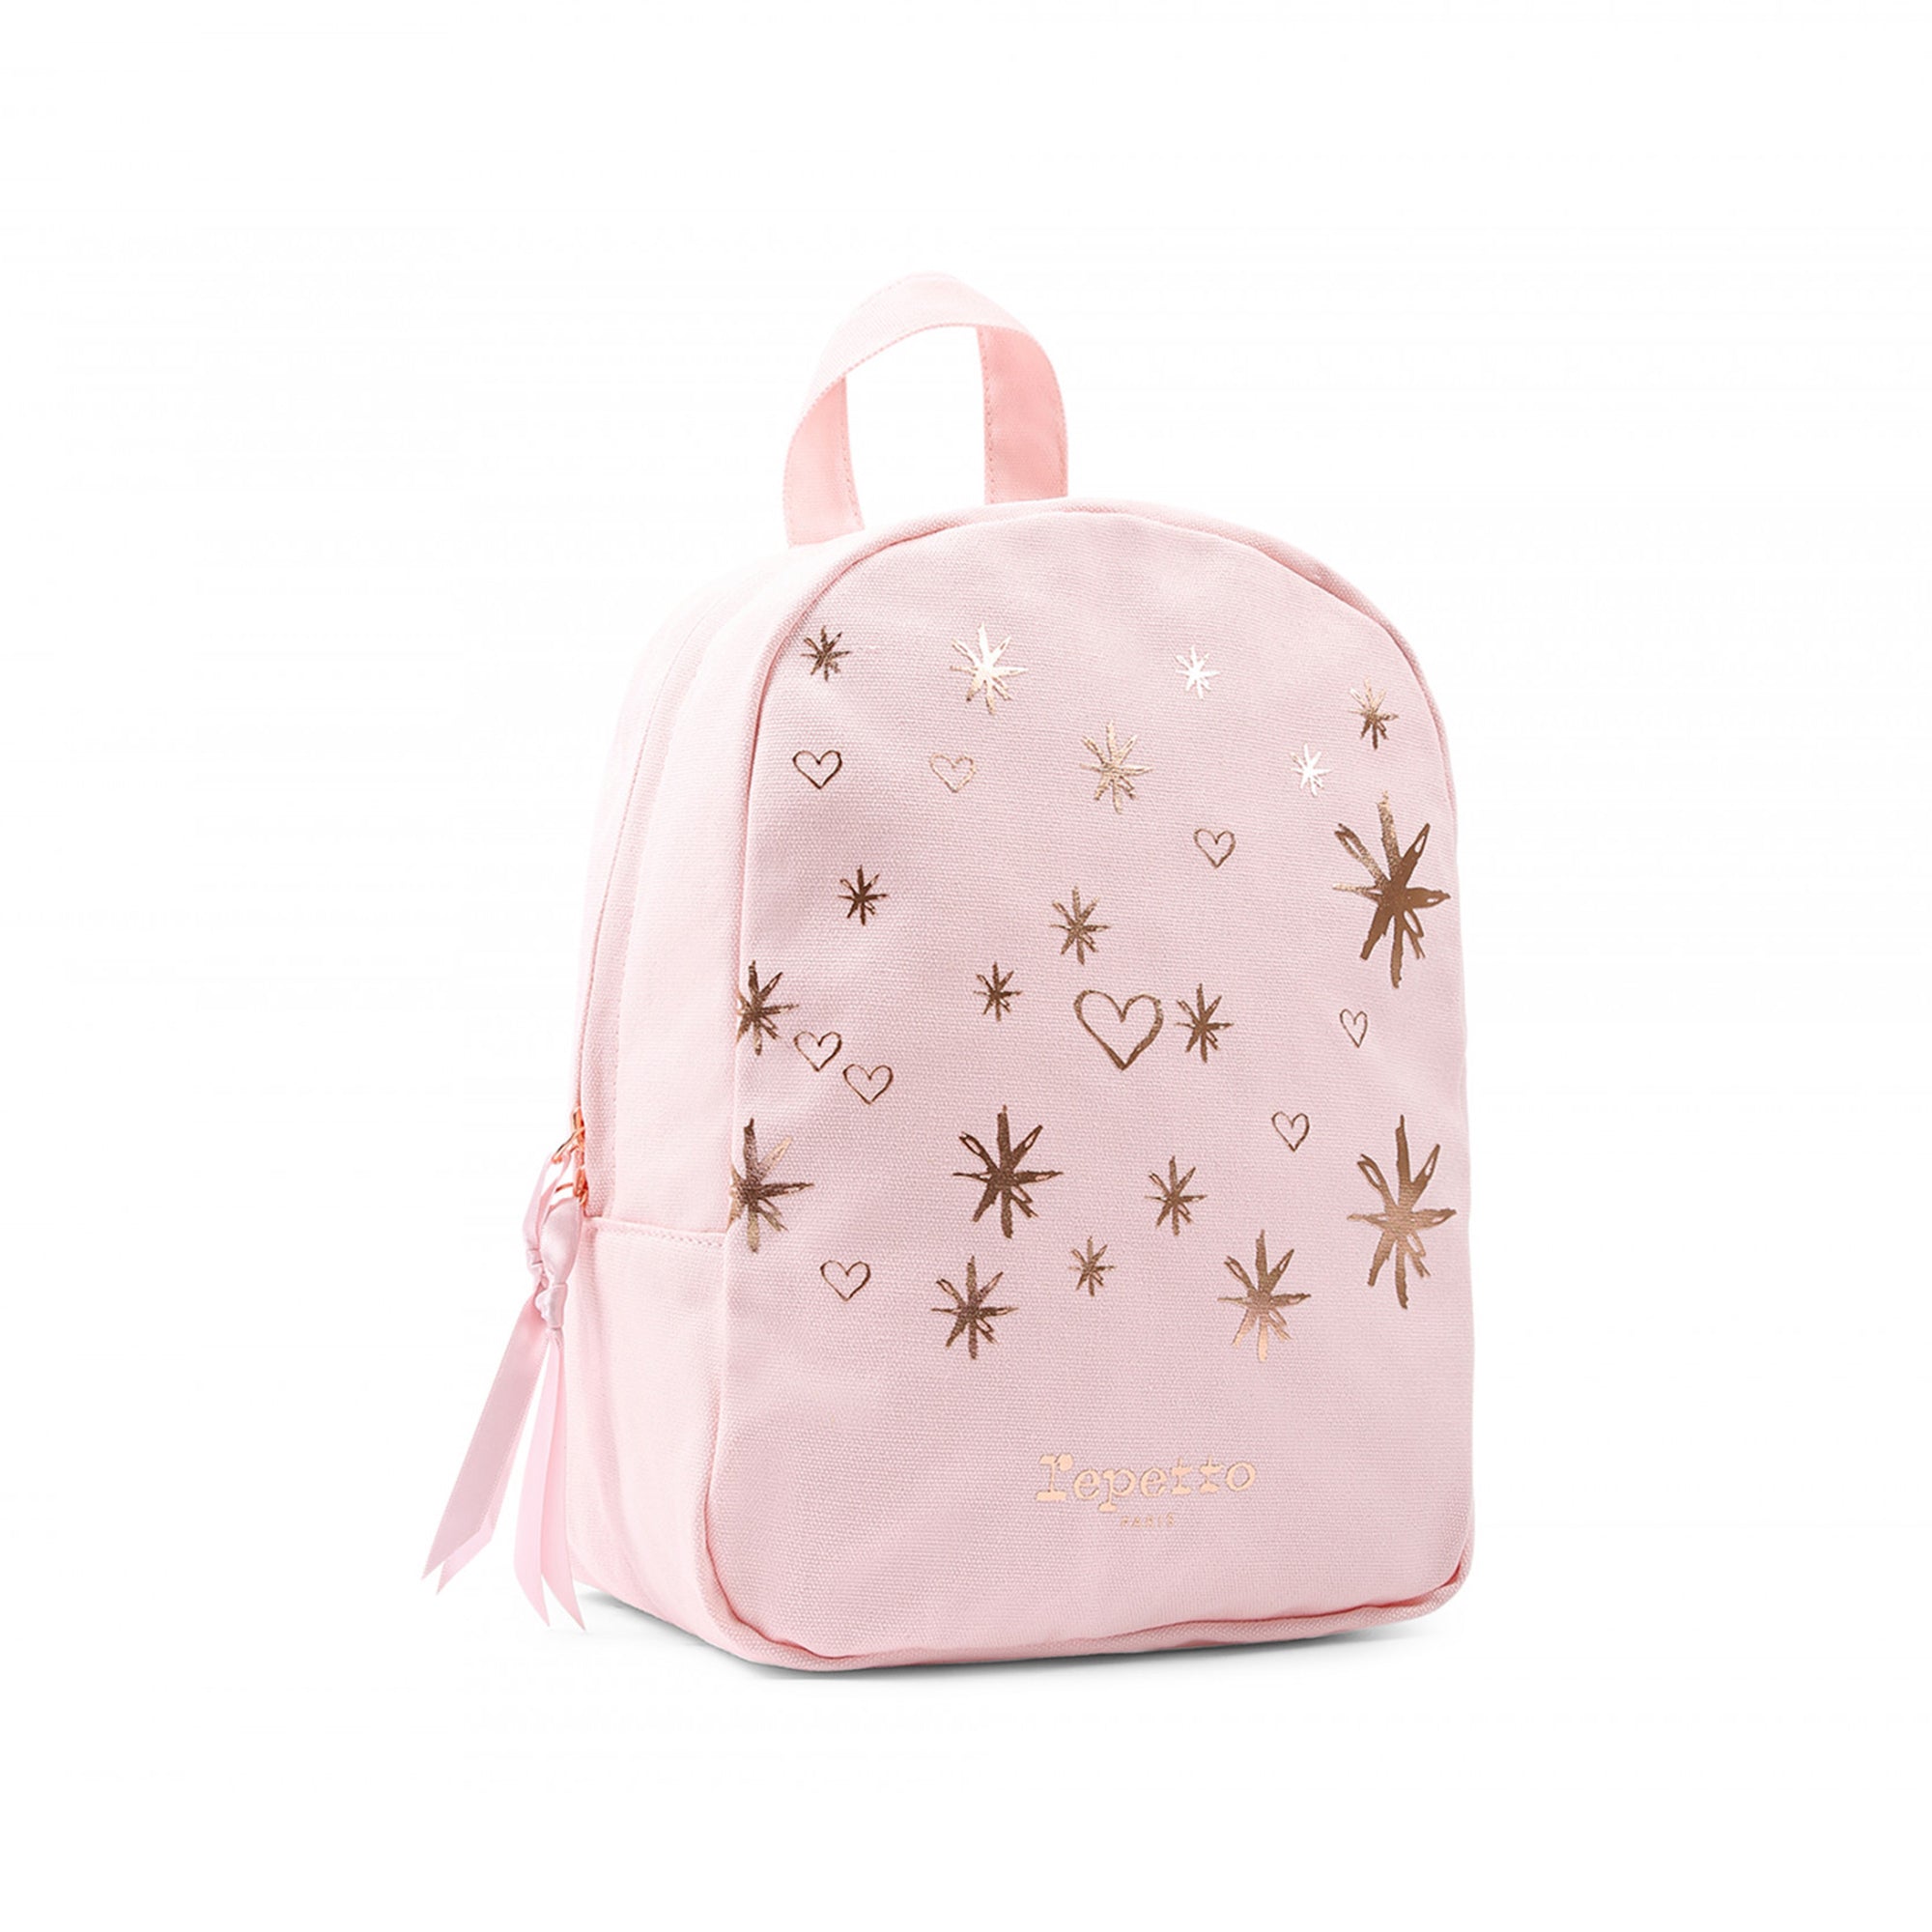 Girls Pale Pink Cotton Backpack